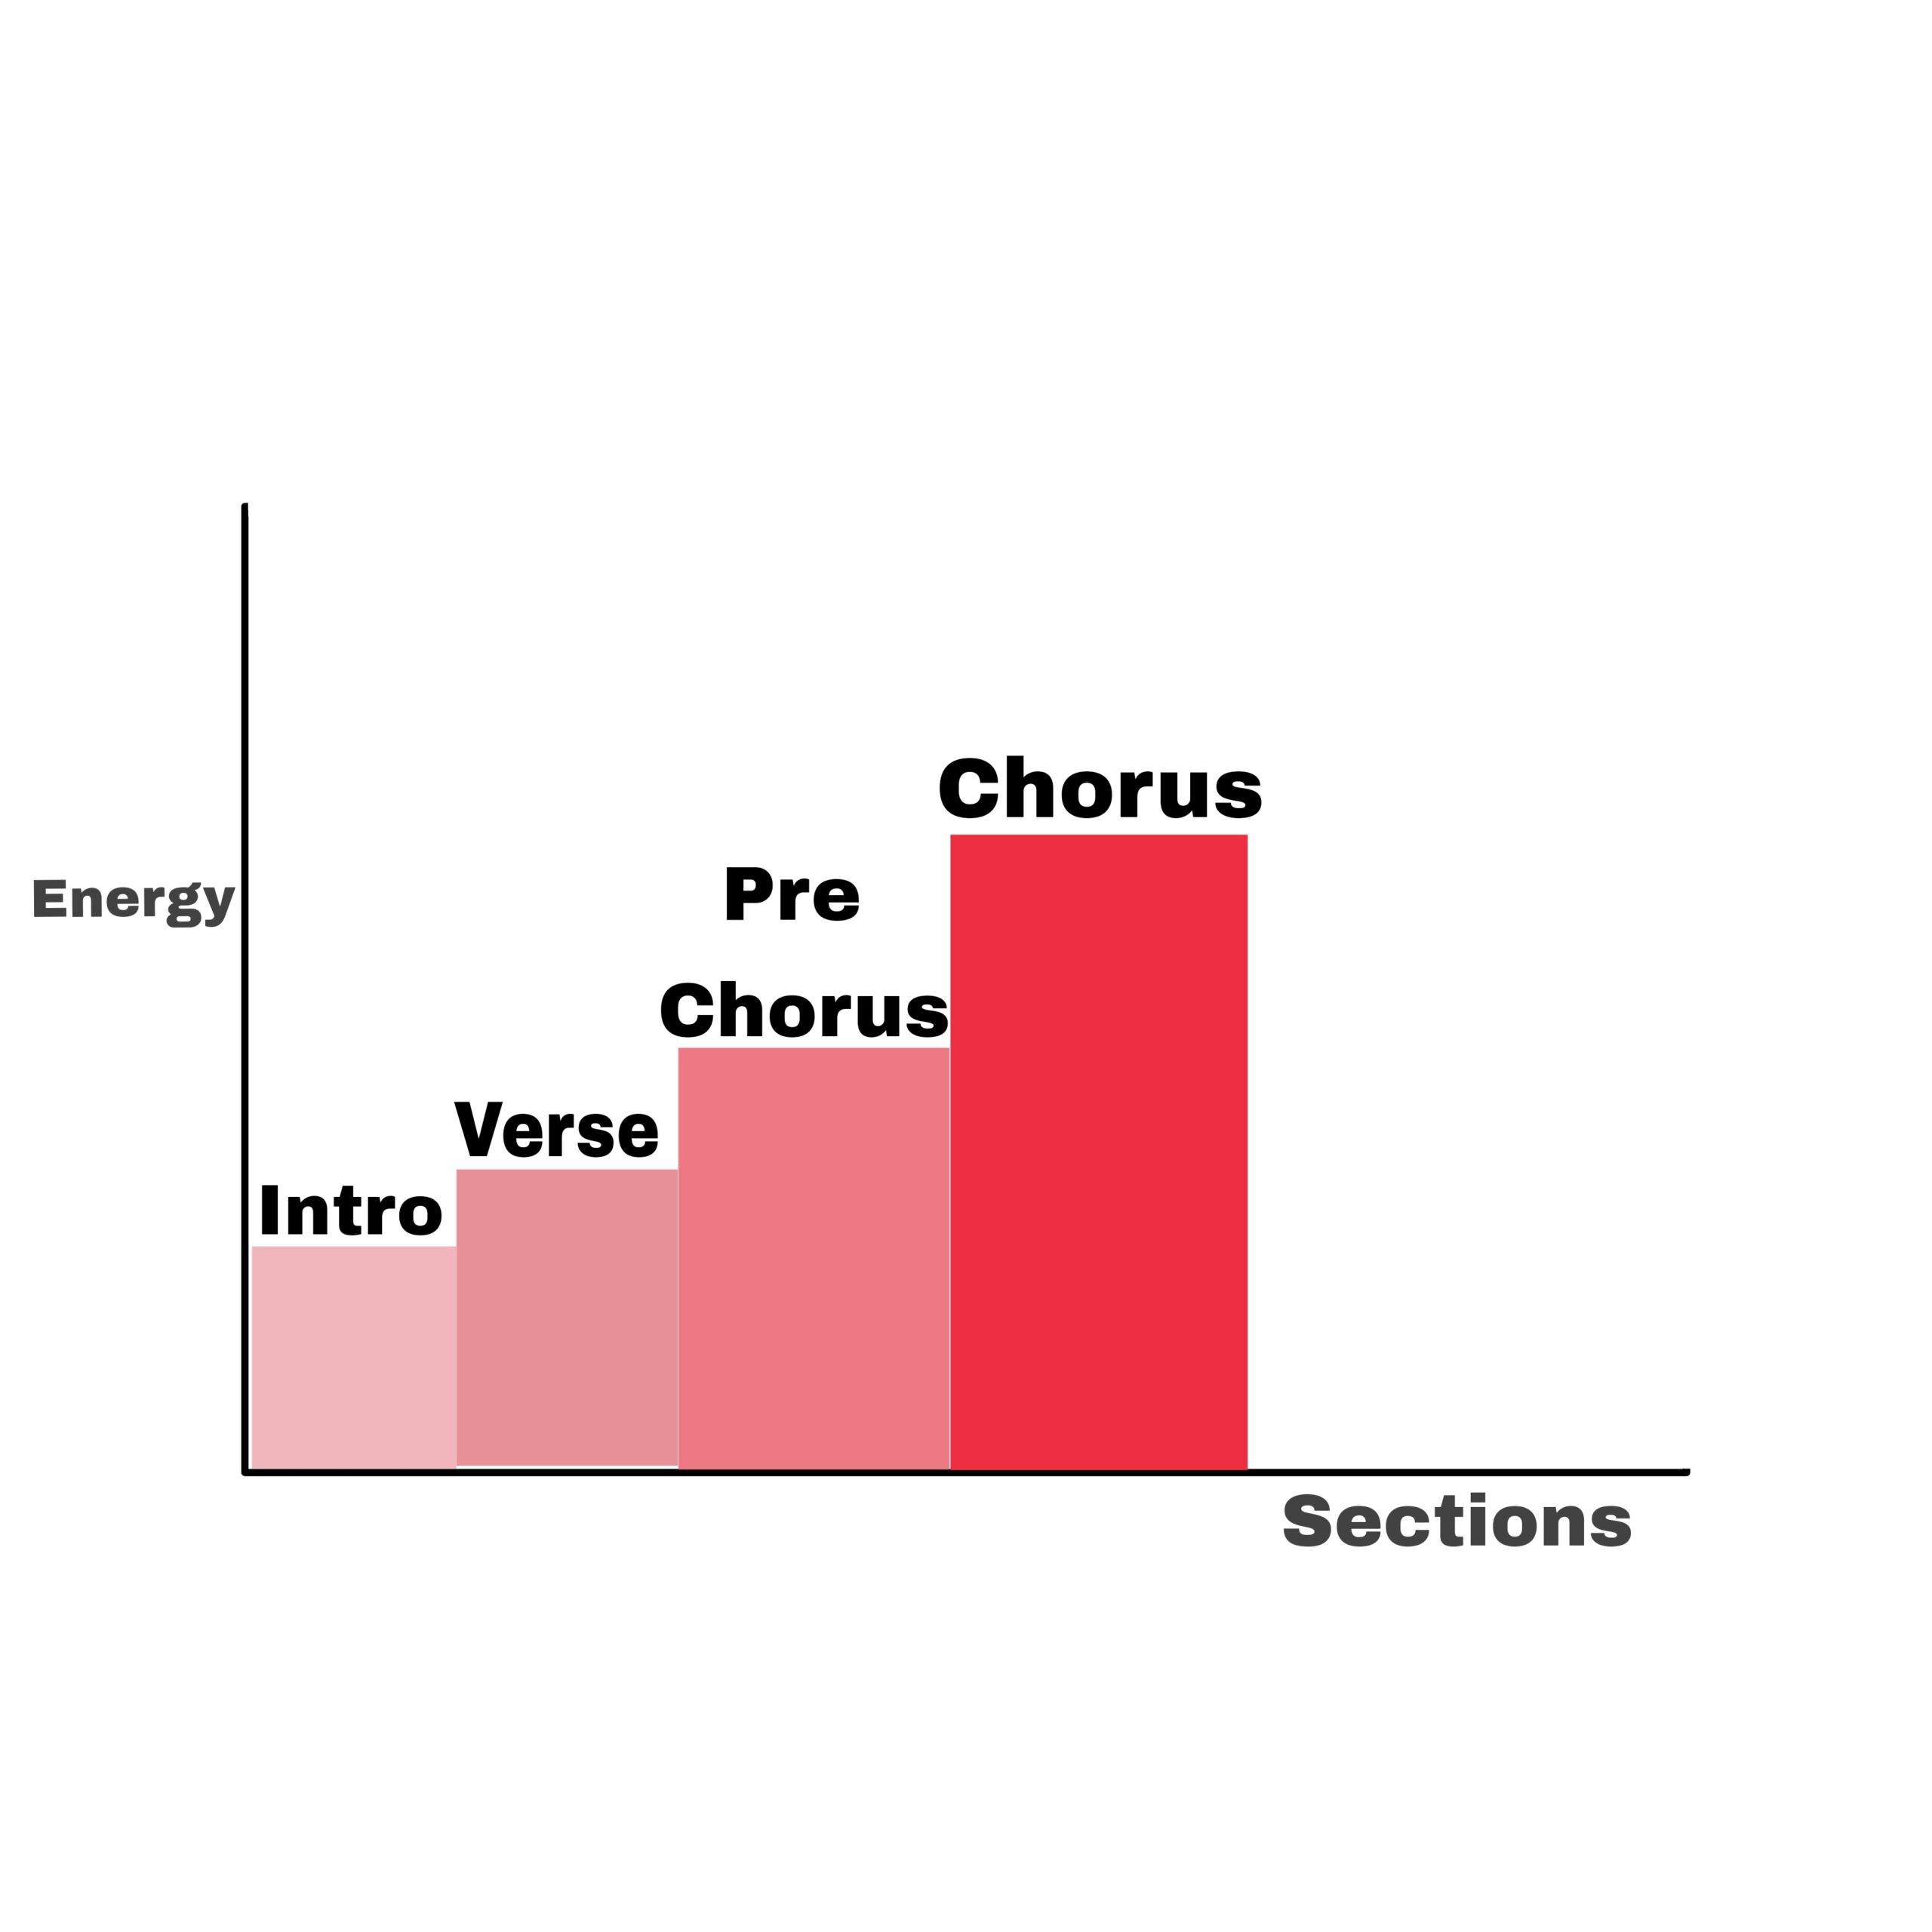 Graph of energies across song sections